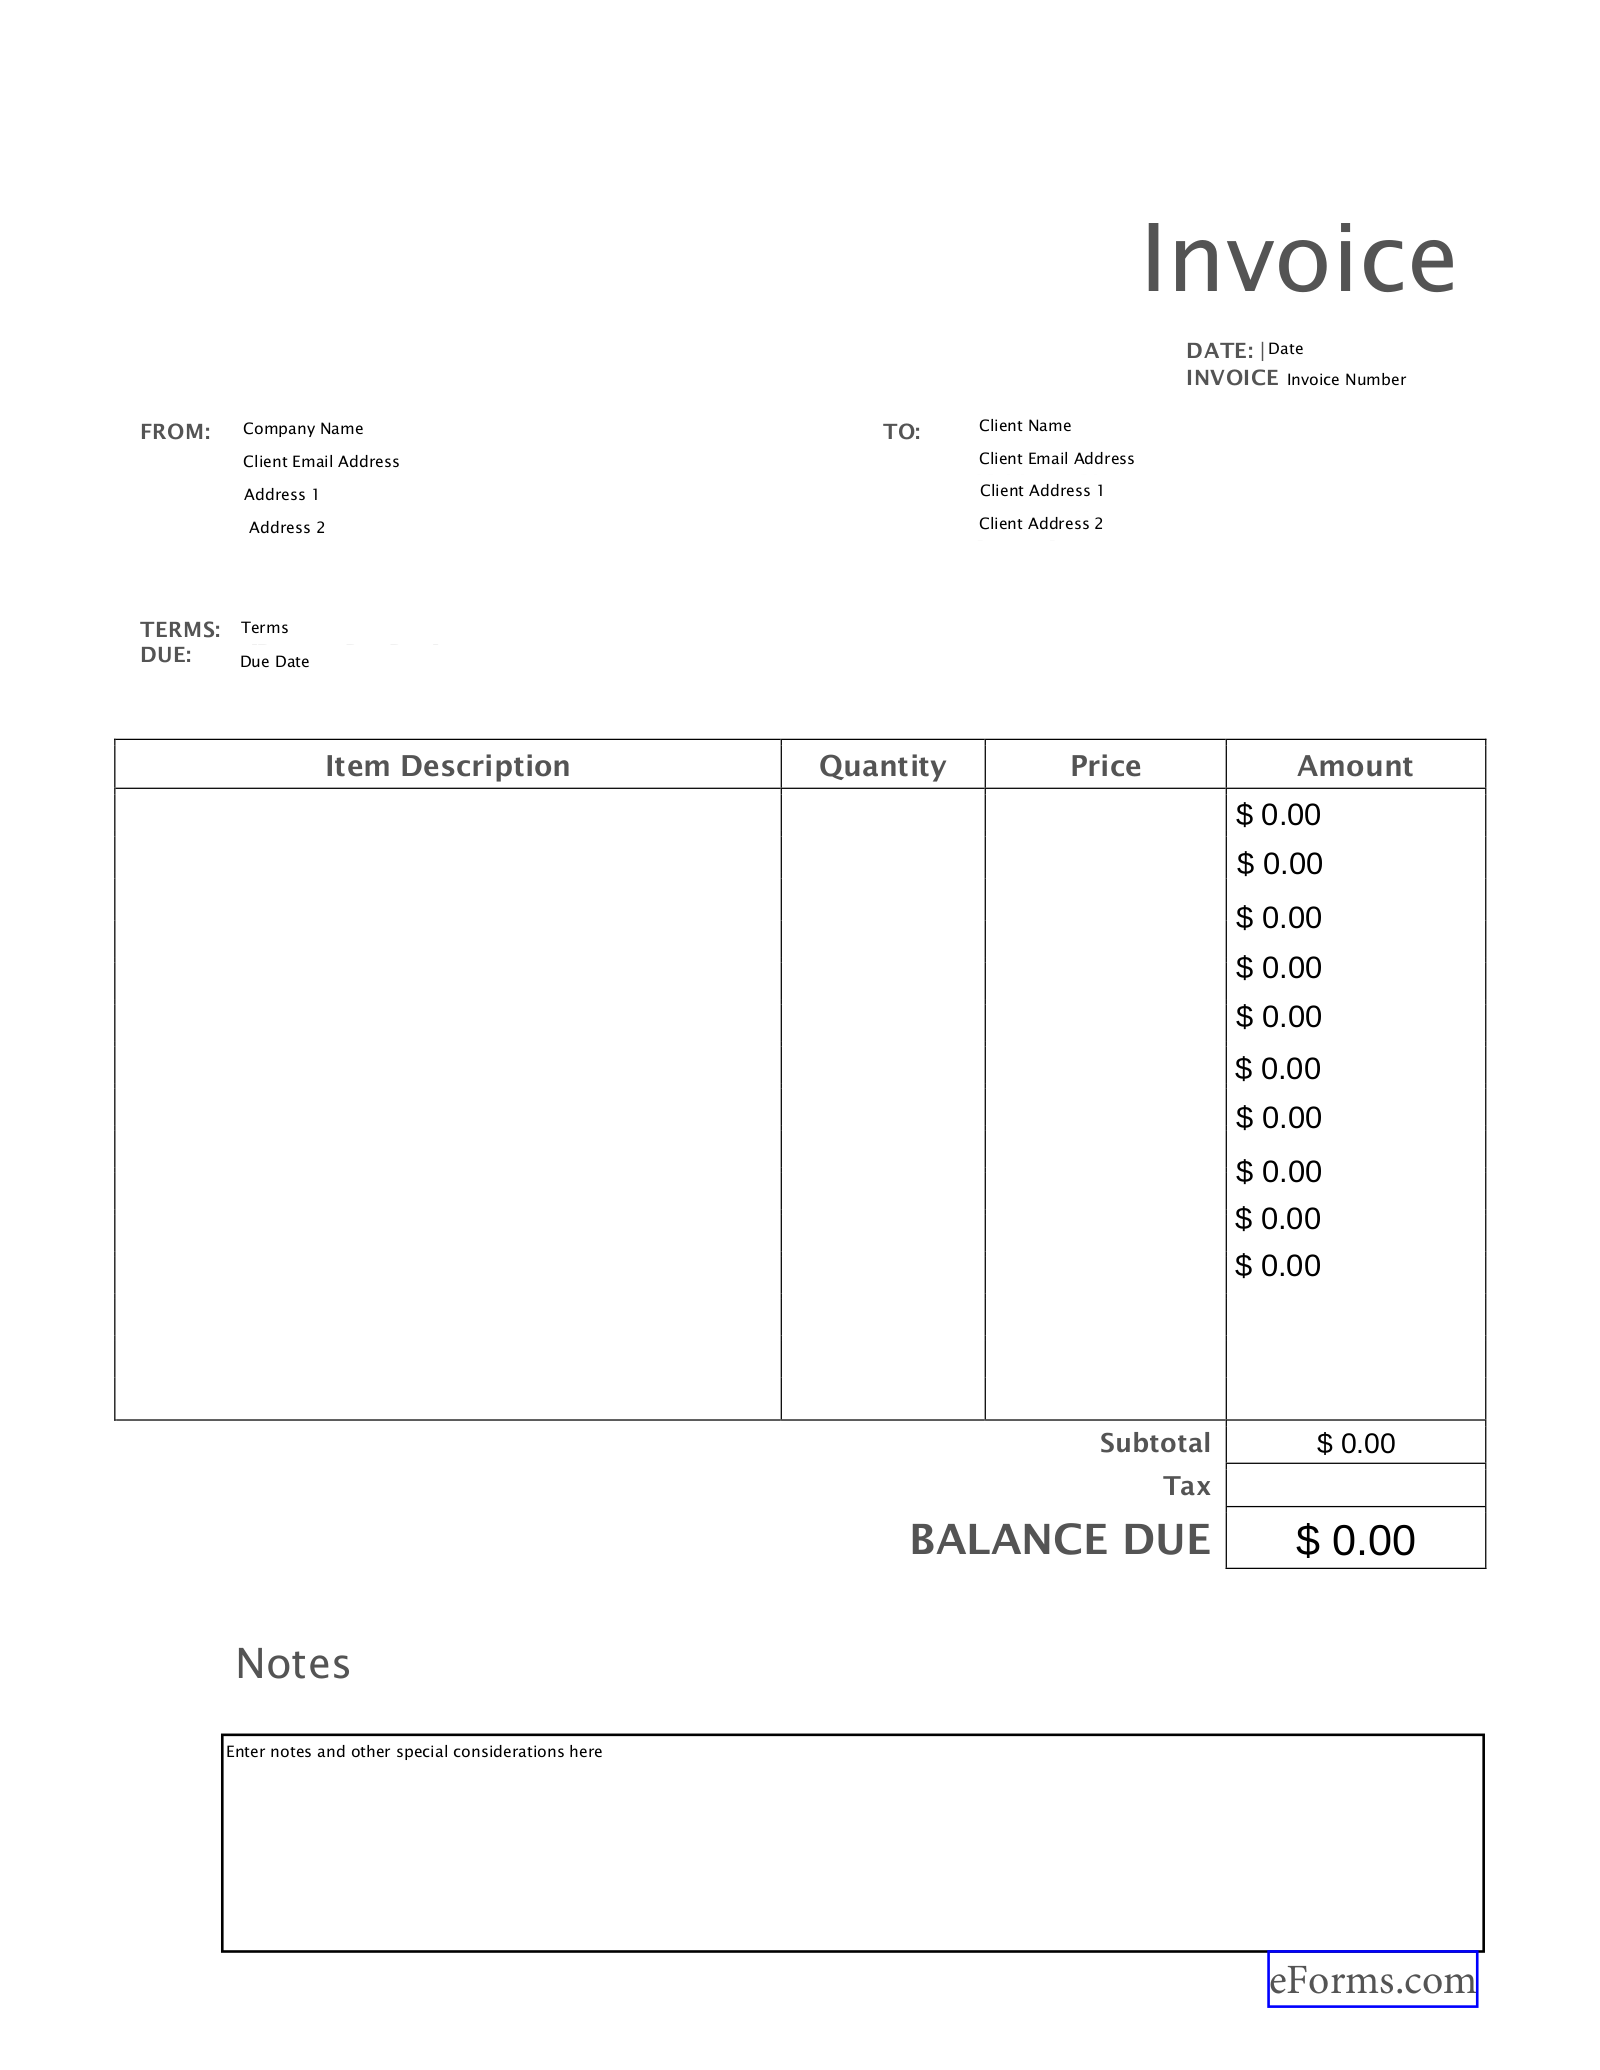 Free Blank Invoice Templates 30 PDF EForms - Free Bill Invoice Template Printable